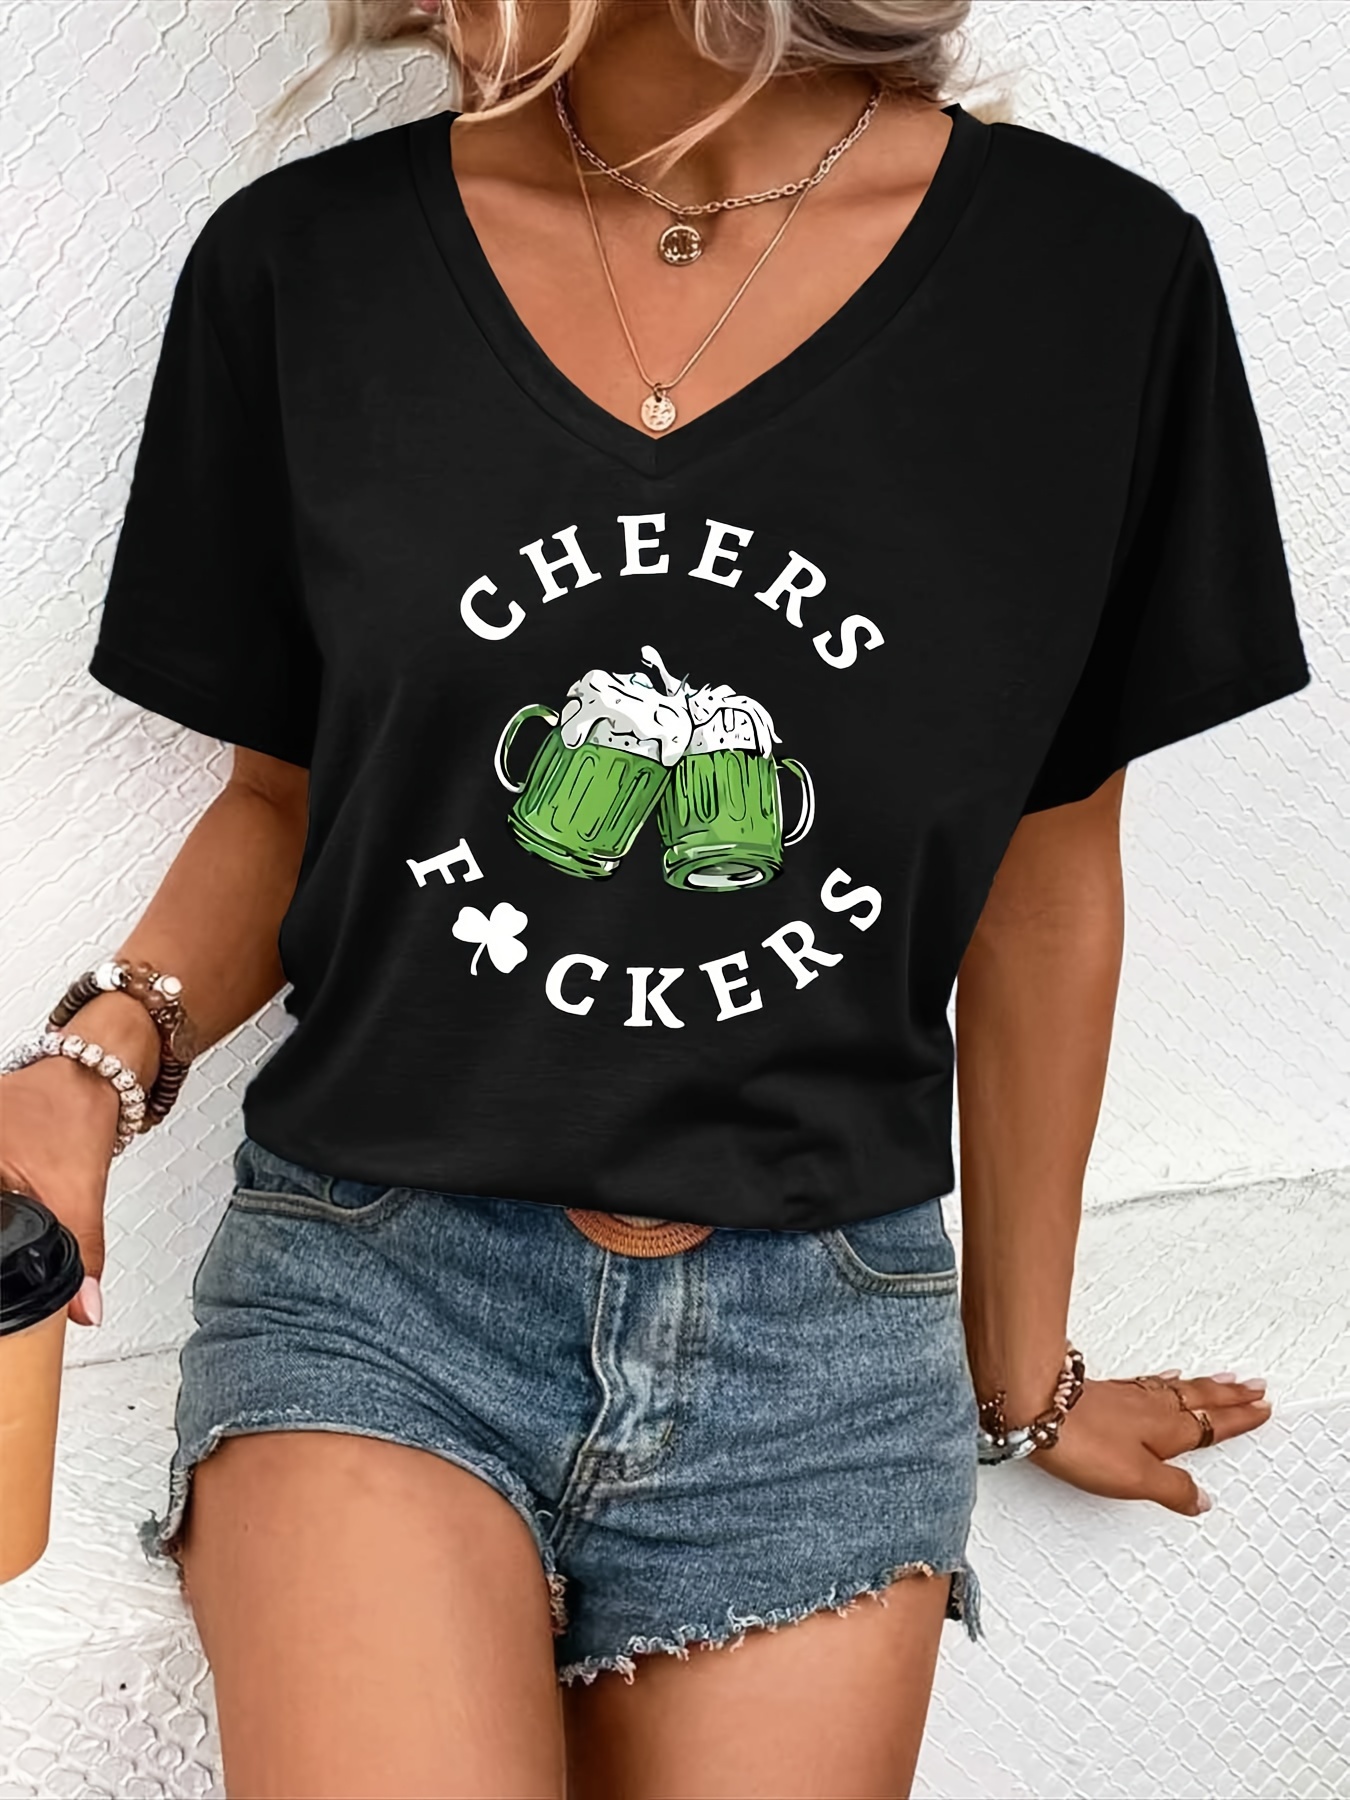 drink letter print casual t shirt v neck short sleeves stretchy sports tee st patricks day womens comfy tops details 0